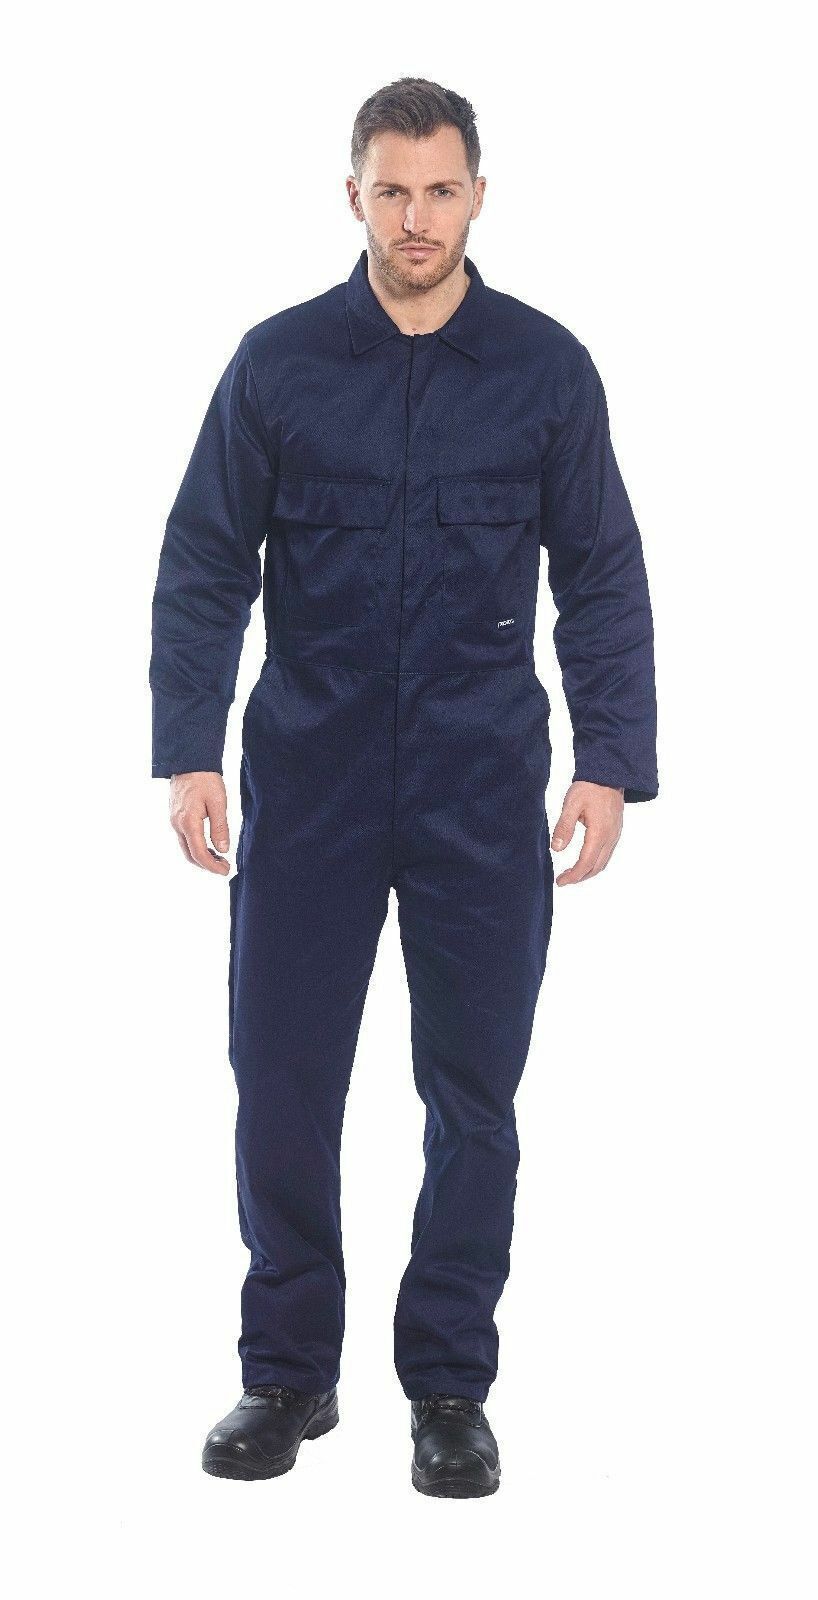 Portwest S999 Euro Work Polycotton Coverall Mechanic Jumpsuit Safety Overalls PORTWEST S999